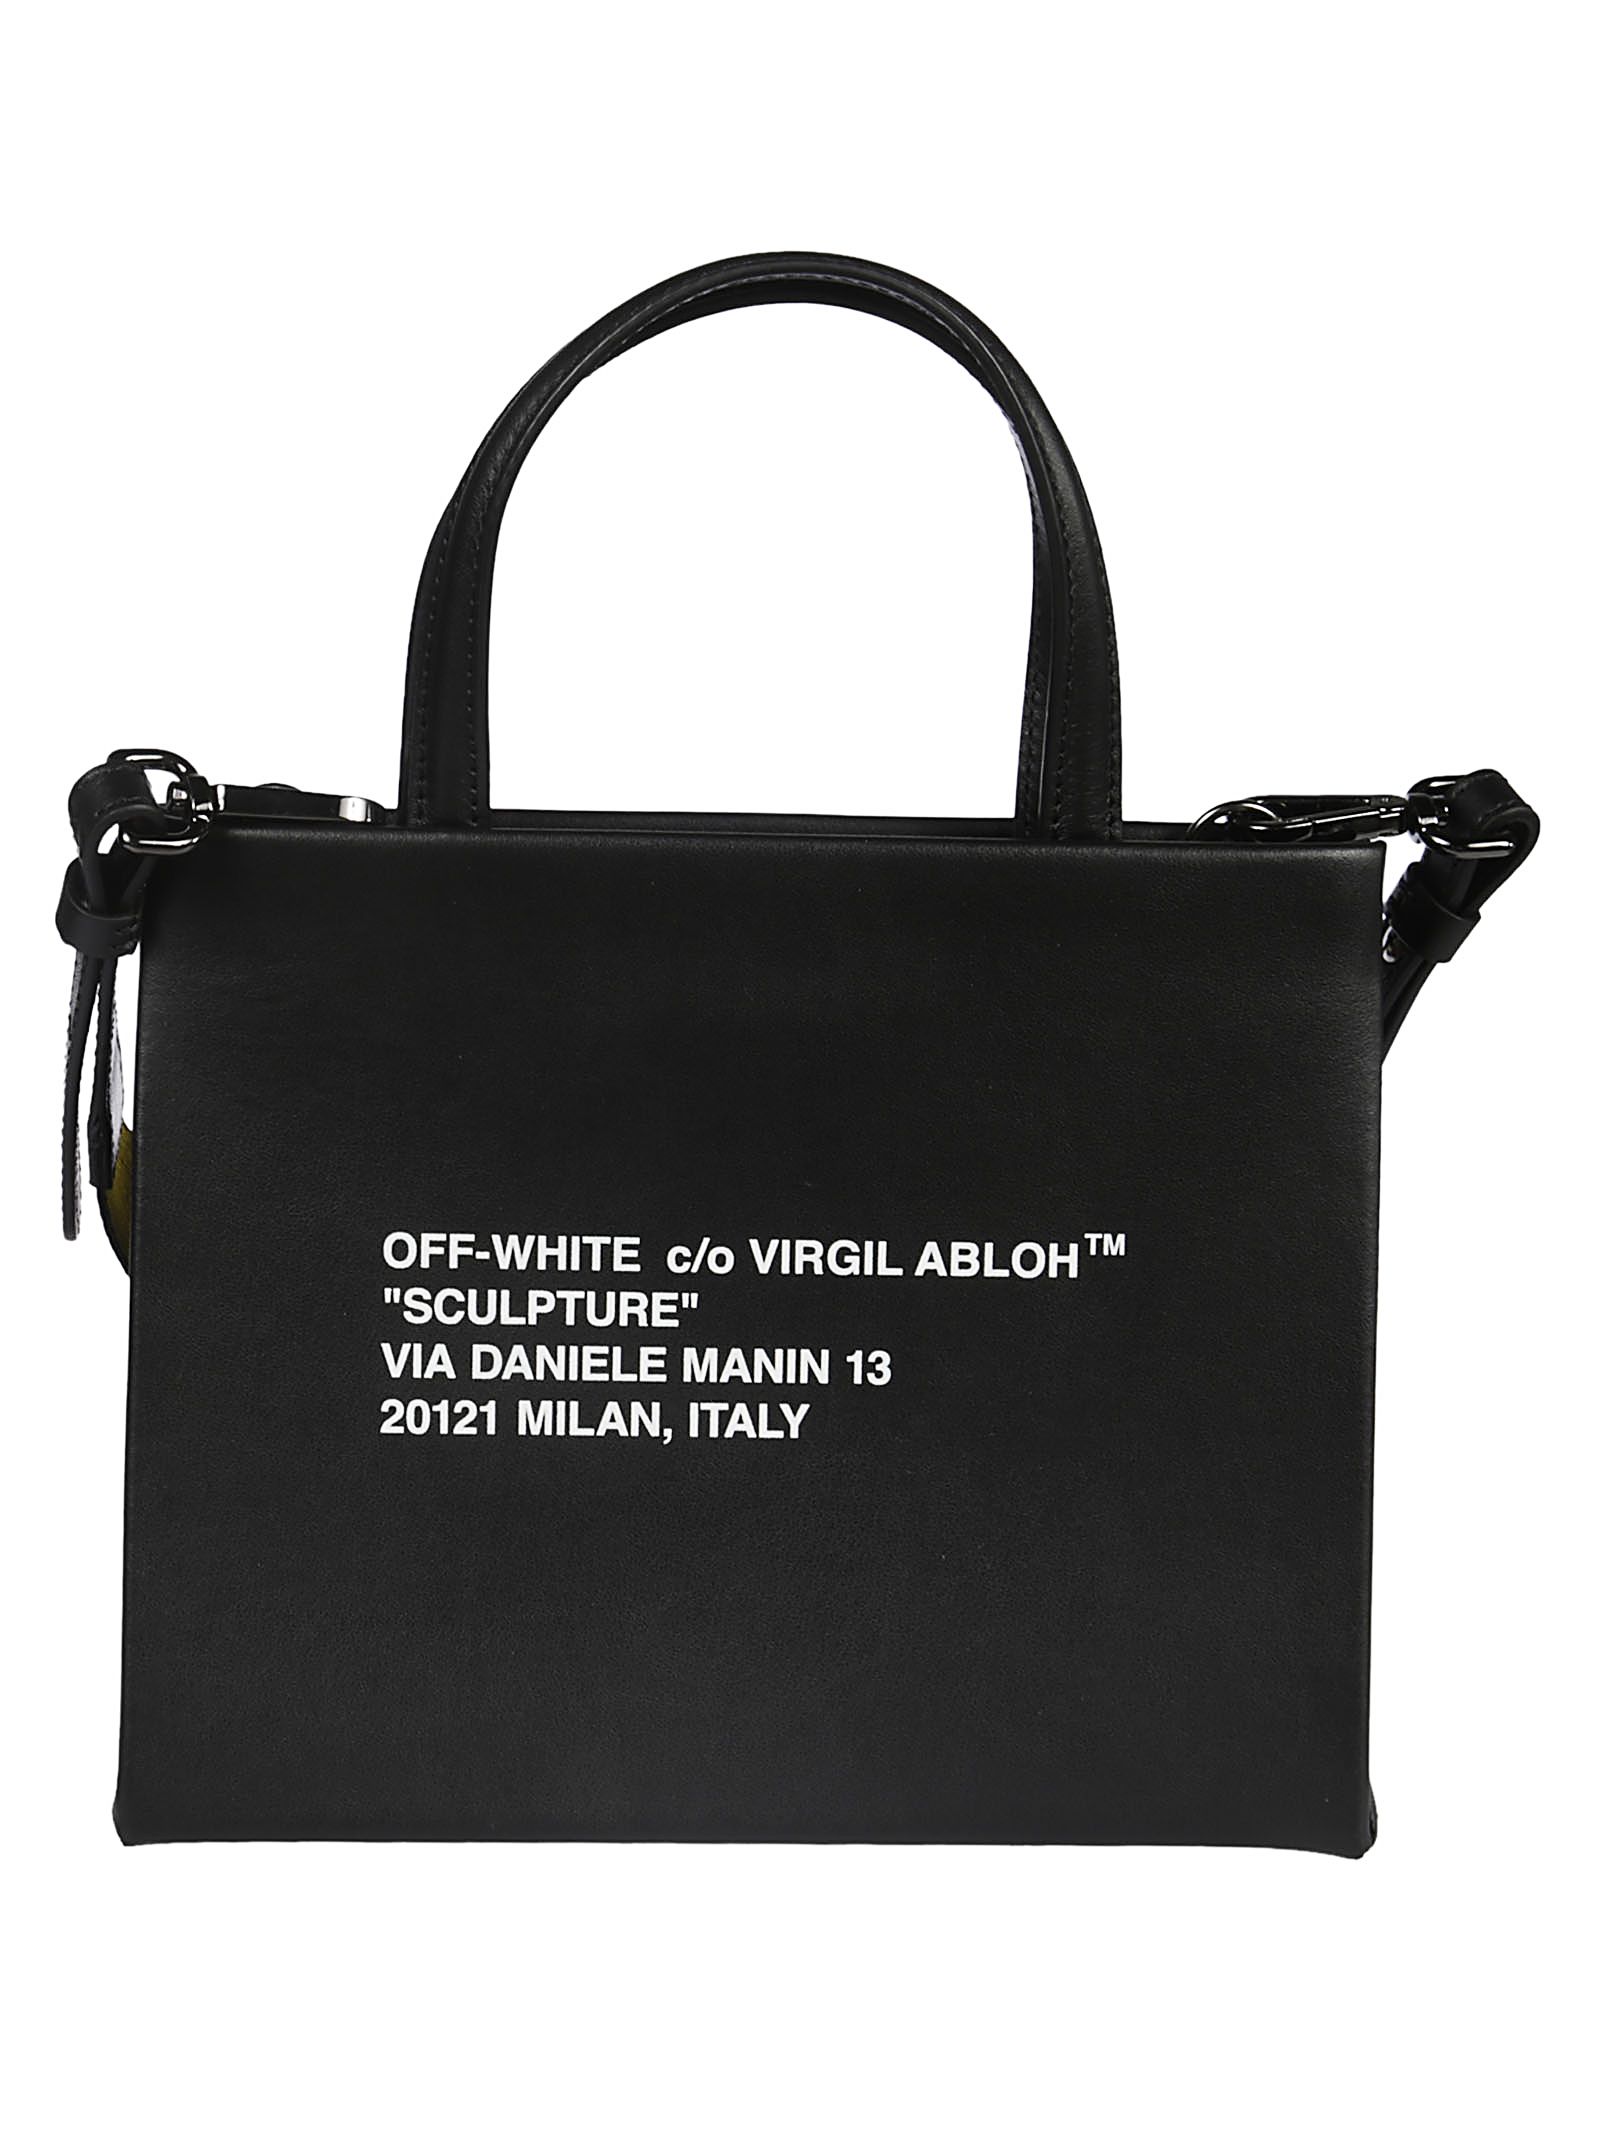 italist | Best price in the market for Off-White Off-White Small Printed Shoulder Bag - Black ...